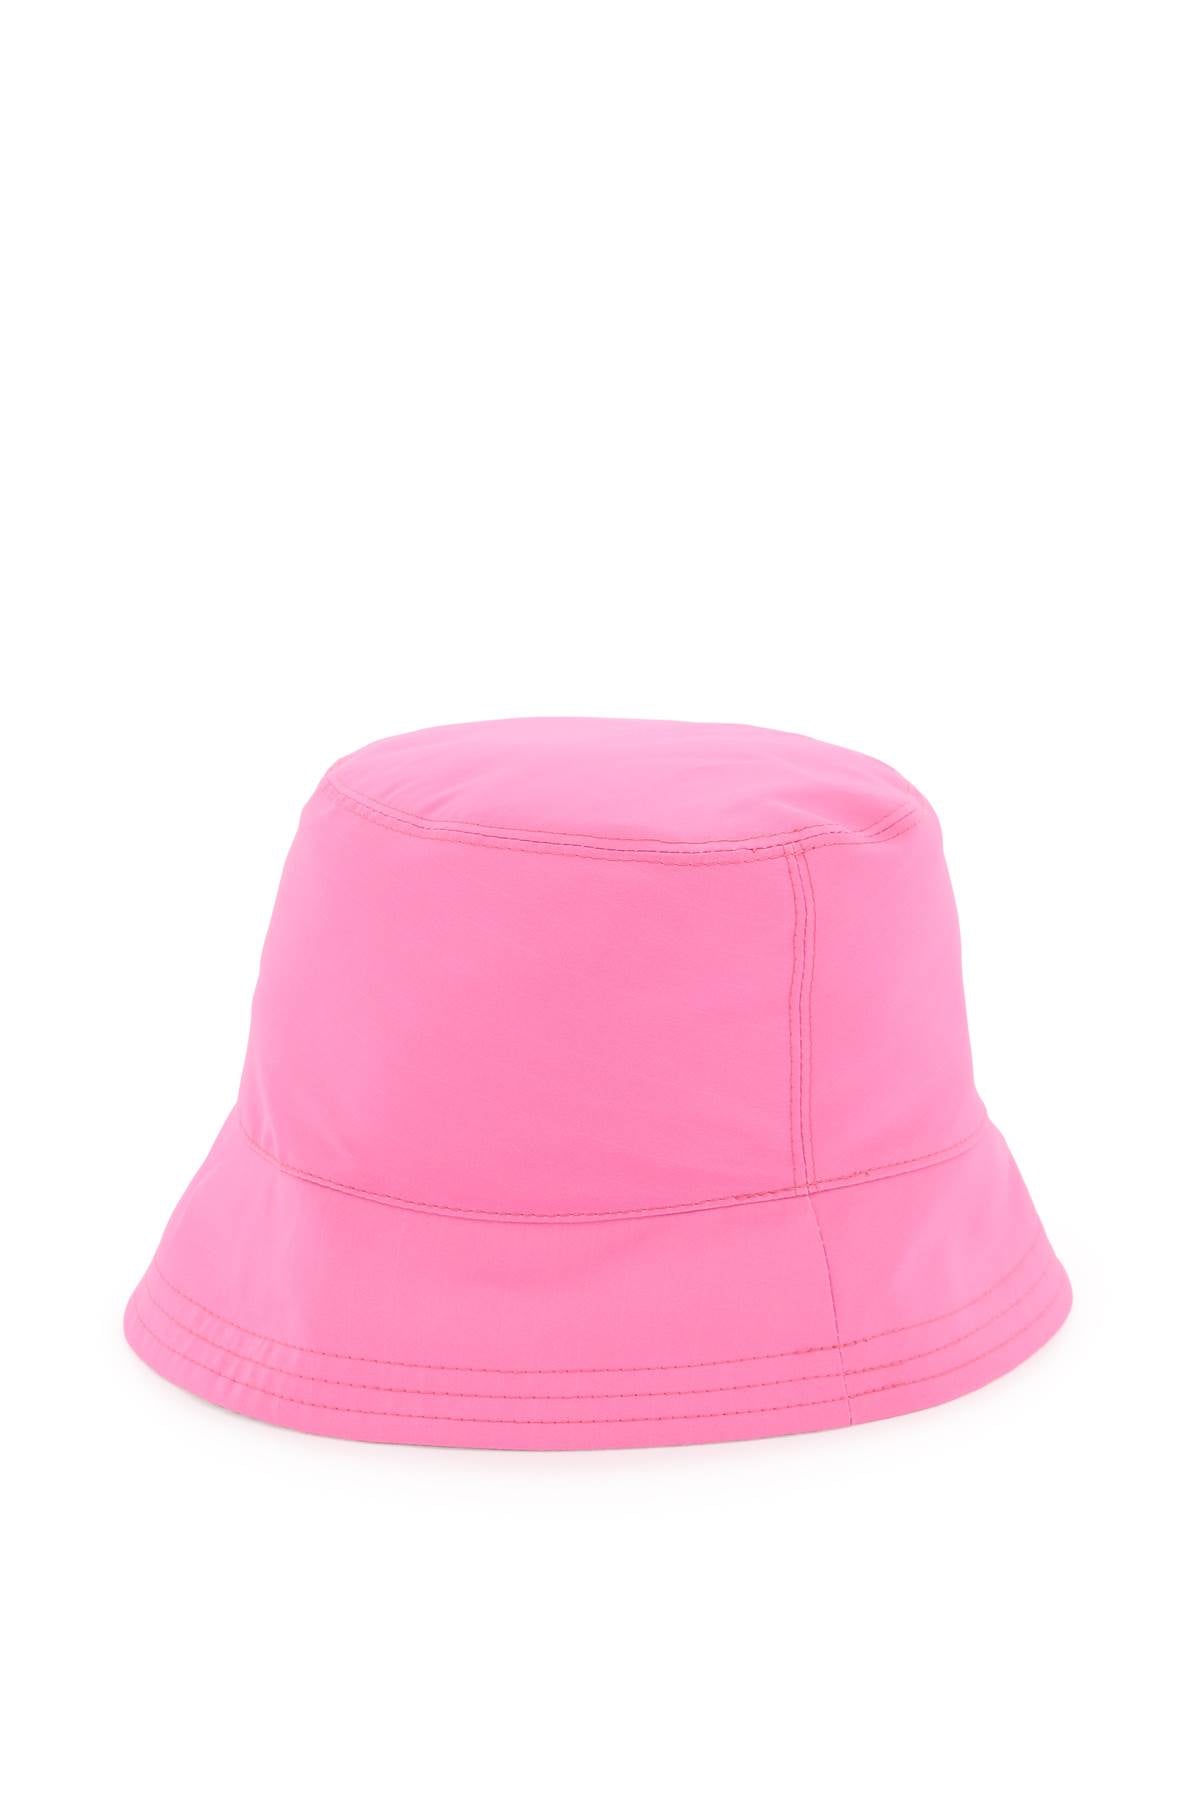 Off-white reversible bucket hat in Pink Hats OFF-WHITE - LOLAMIR